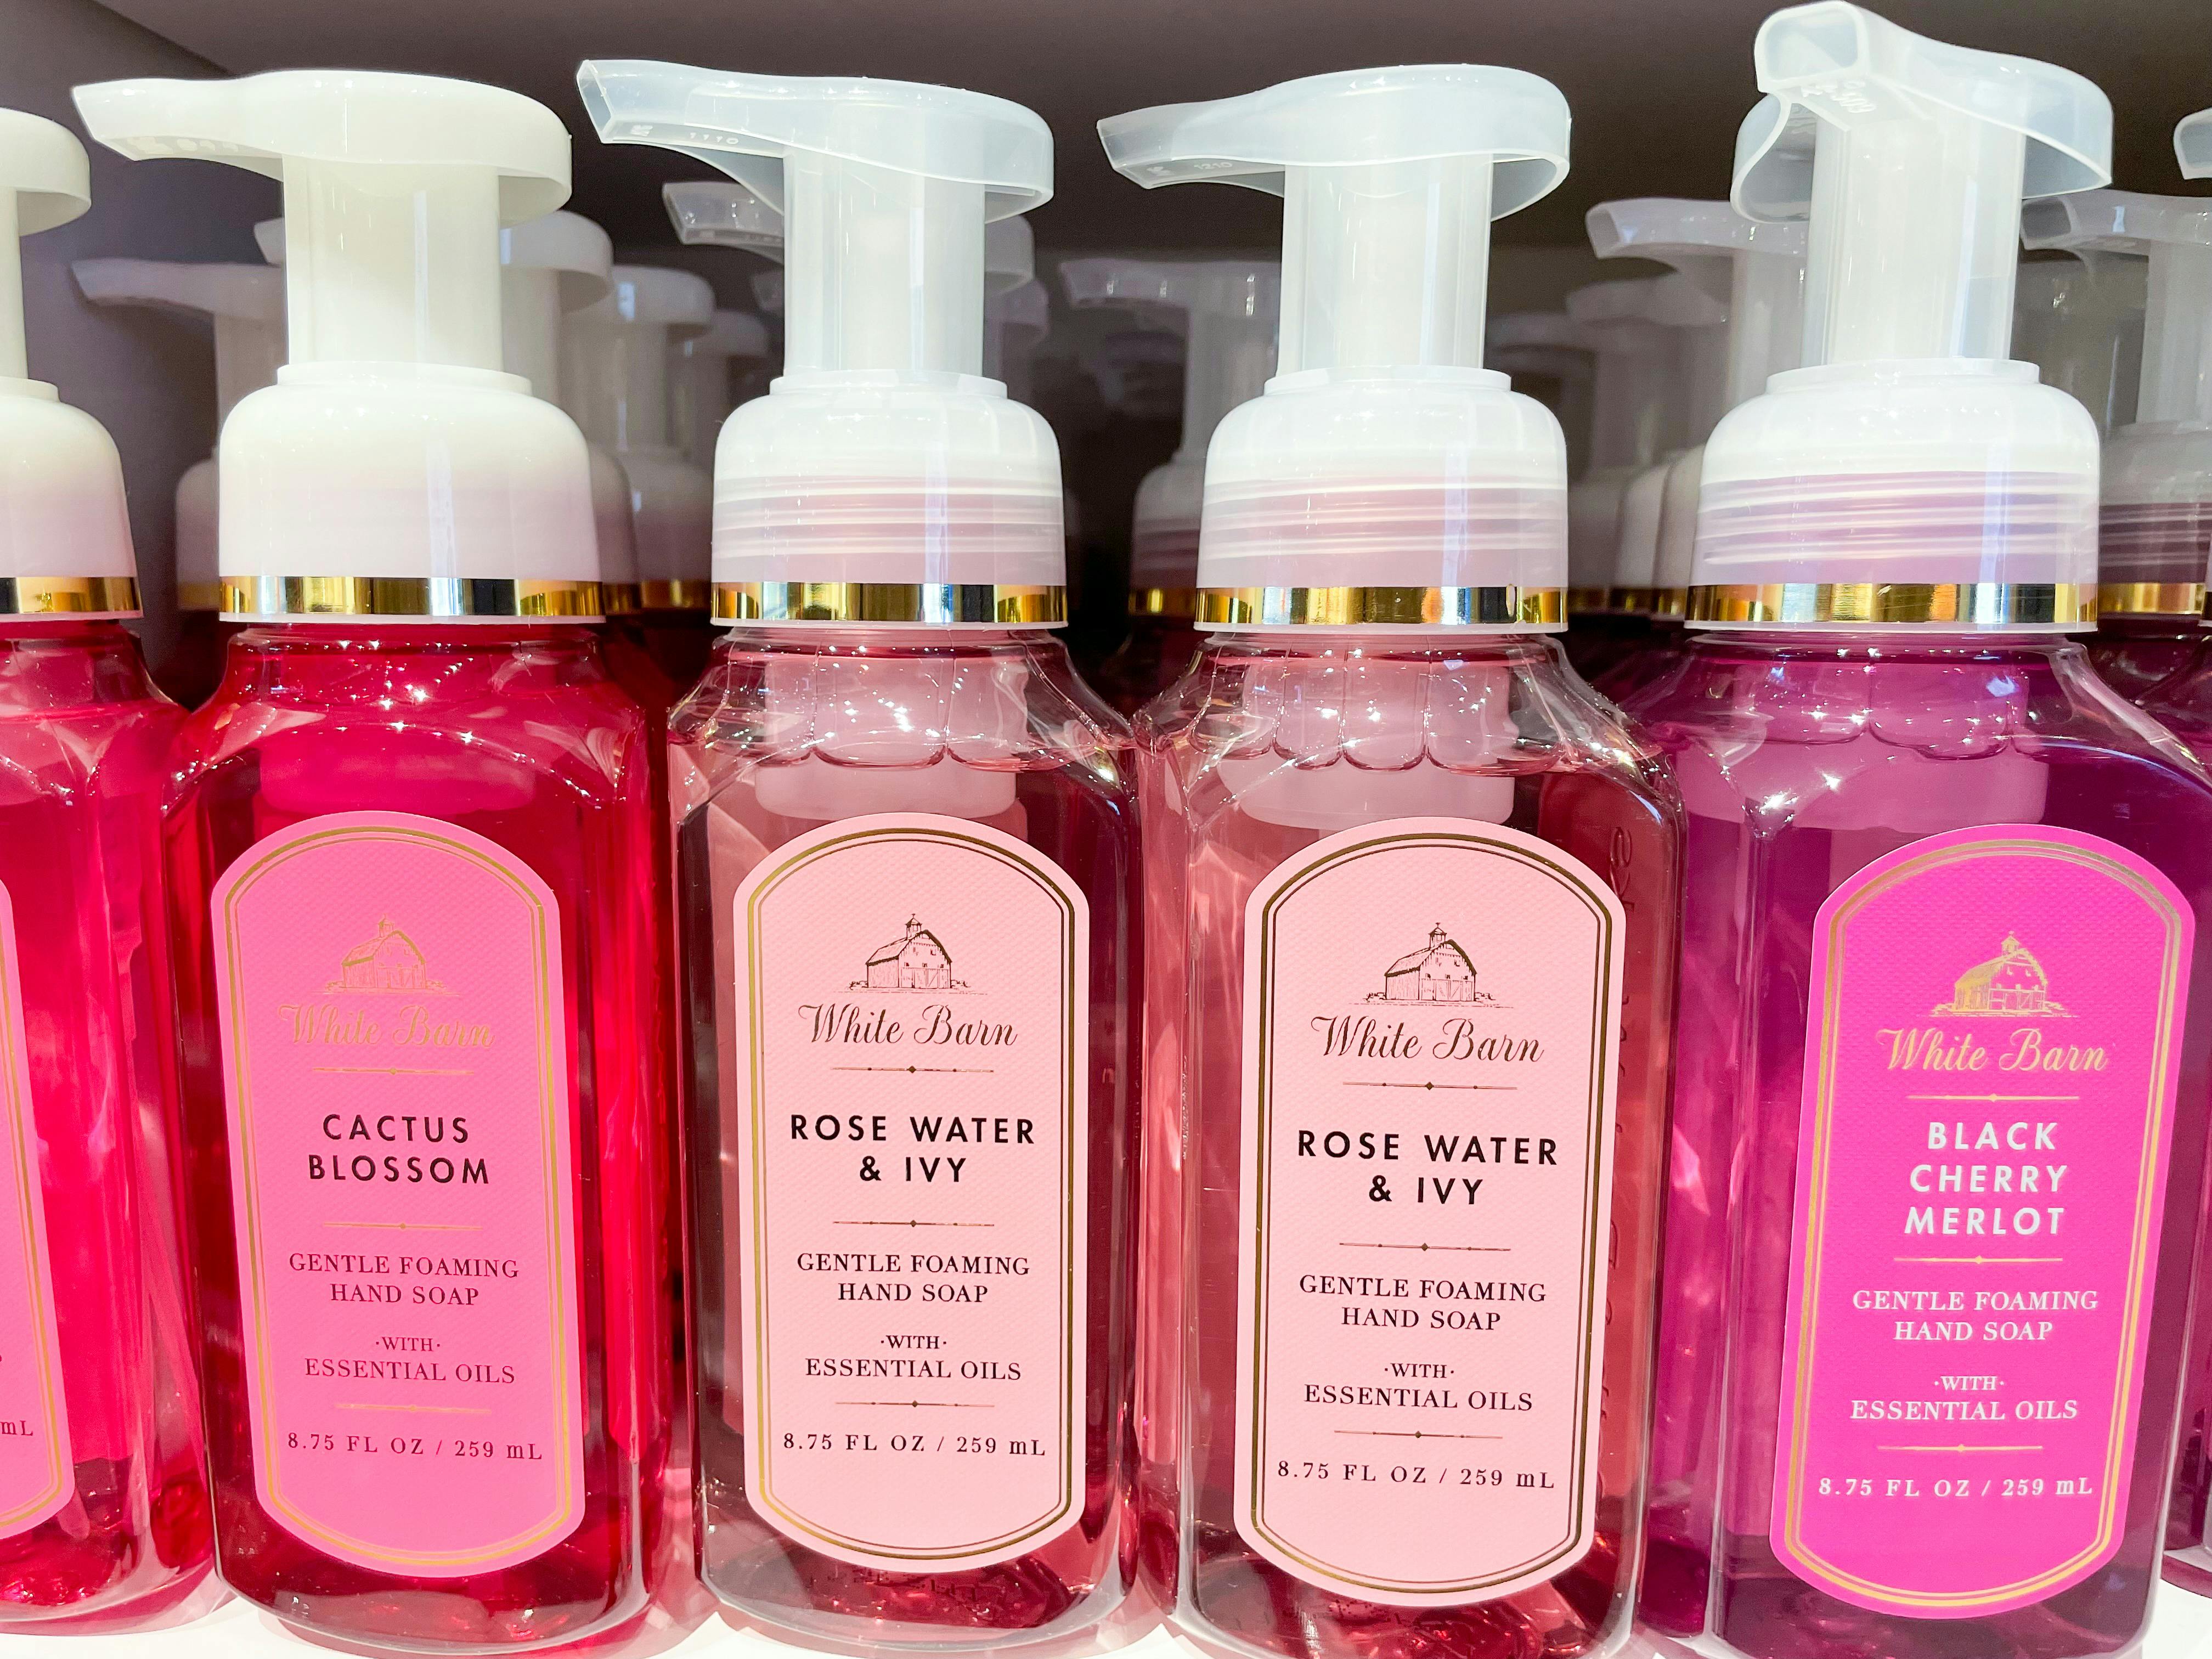 How to Save On Bath and Body Works Hand Soap - The Krazy Coupon Lady